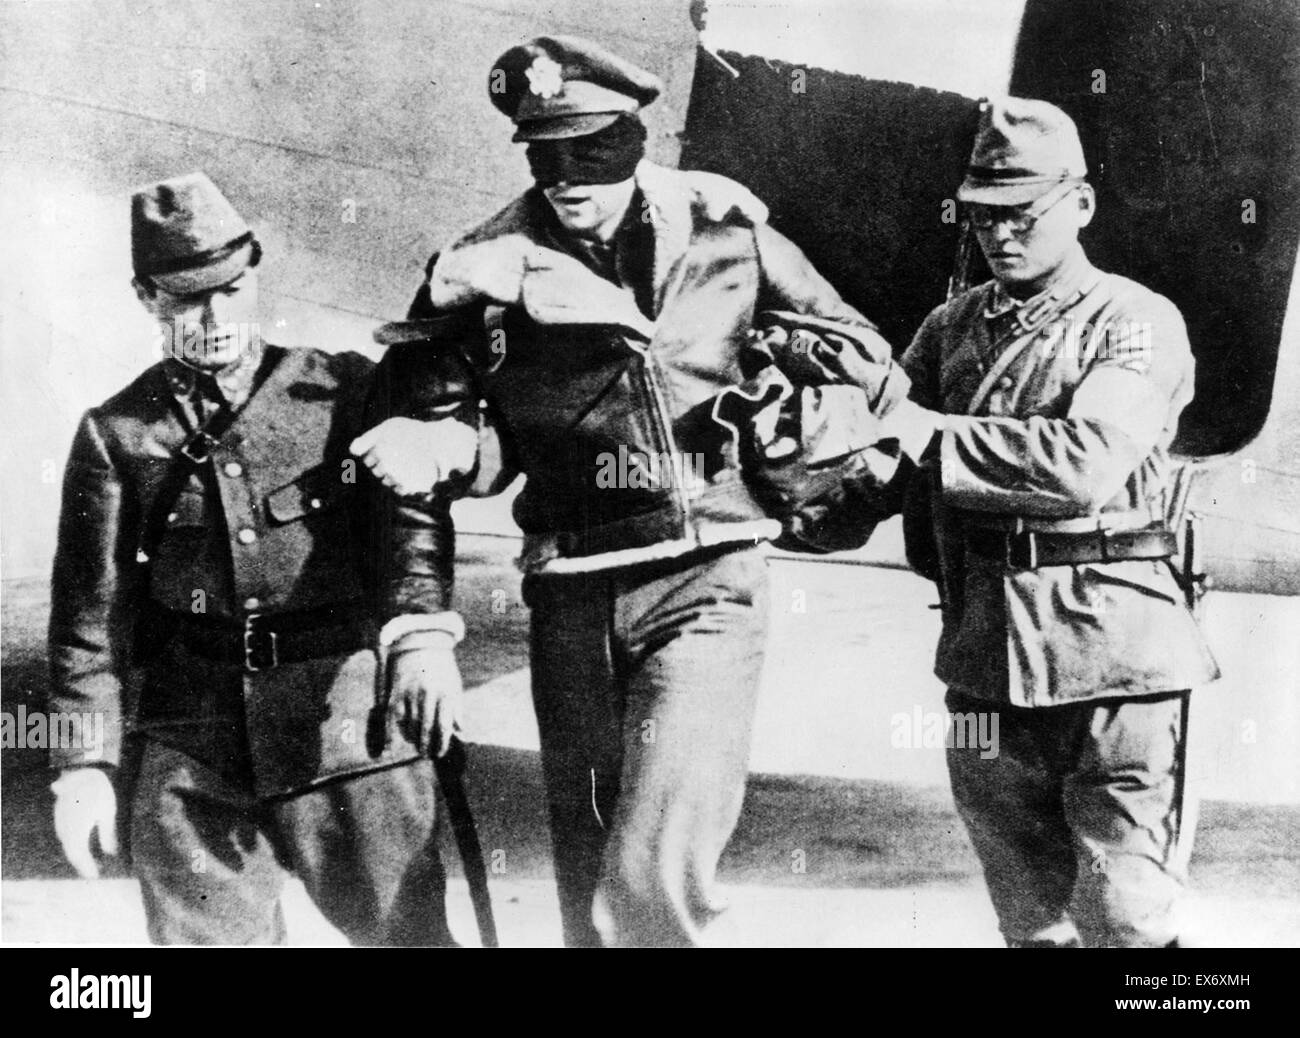 World war two: Captured and blindfolded US Air force pilot, with two Japanese soldiers. Captured during the during Doolittle air raids on Tokyo. 1942 Stock Photo